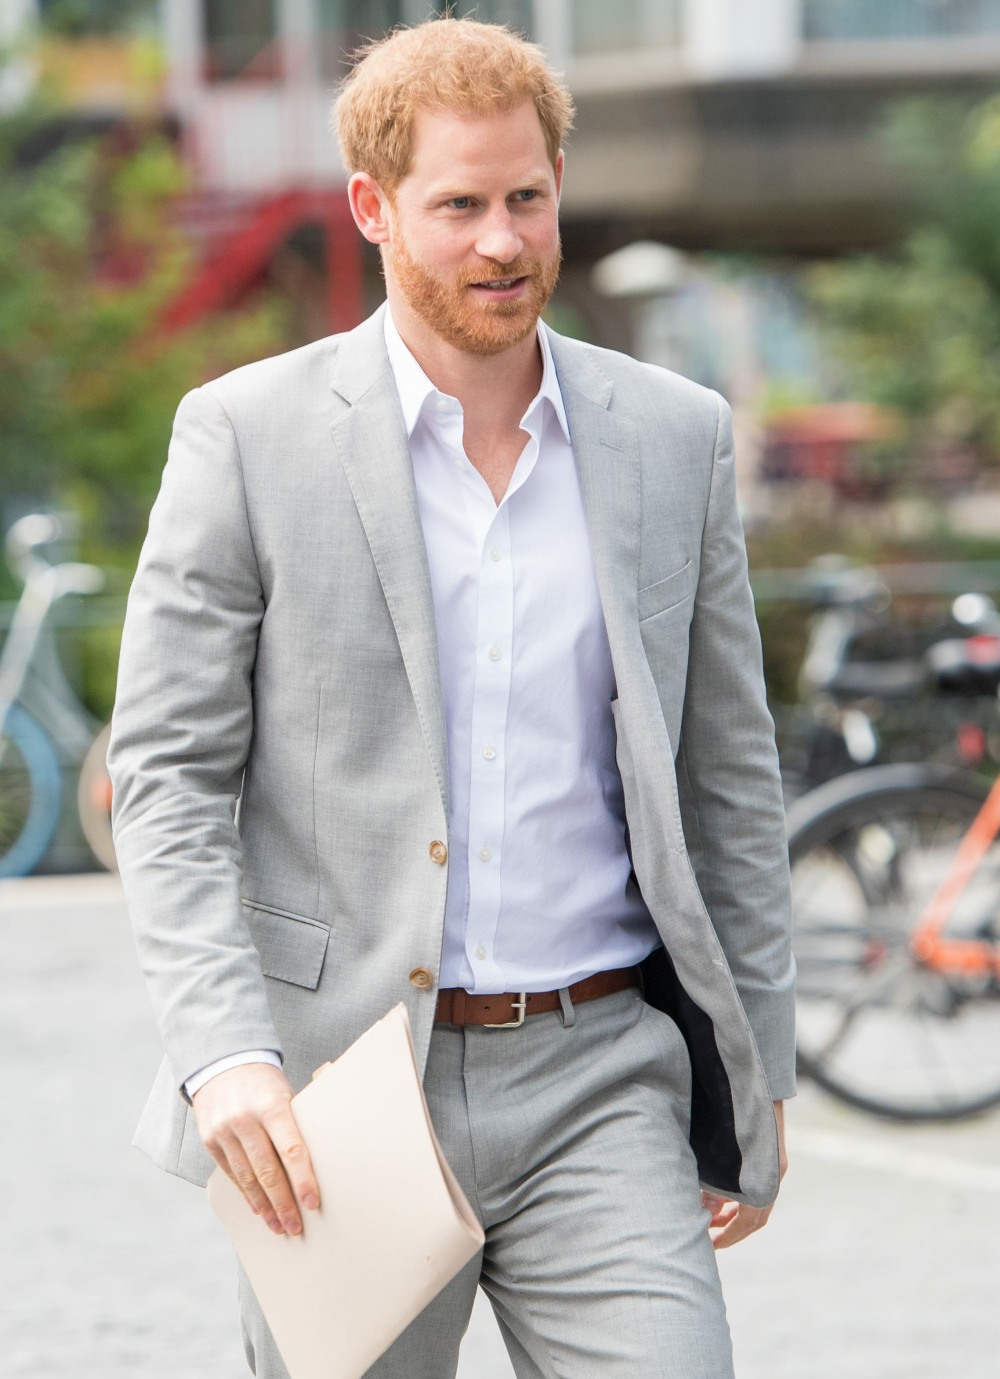 Prince Harry launches new partnershipPhoto: Albert Nieboer / Netherlands OUT / Point de Vue OUT